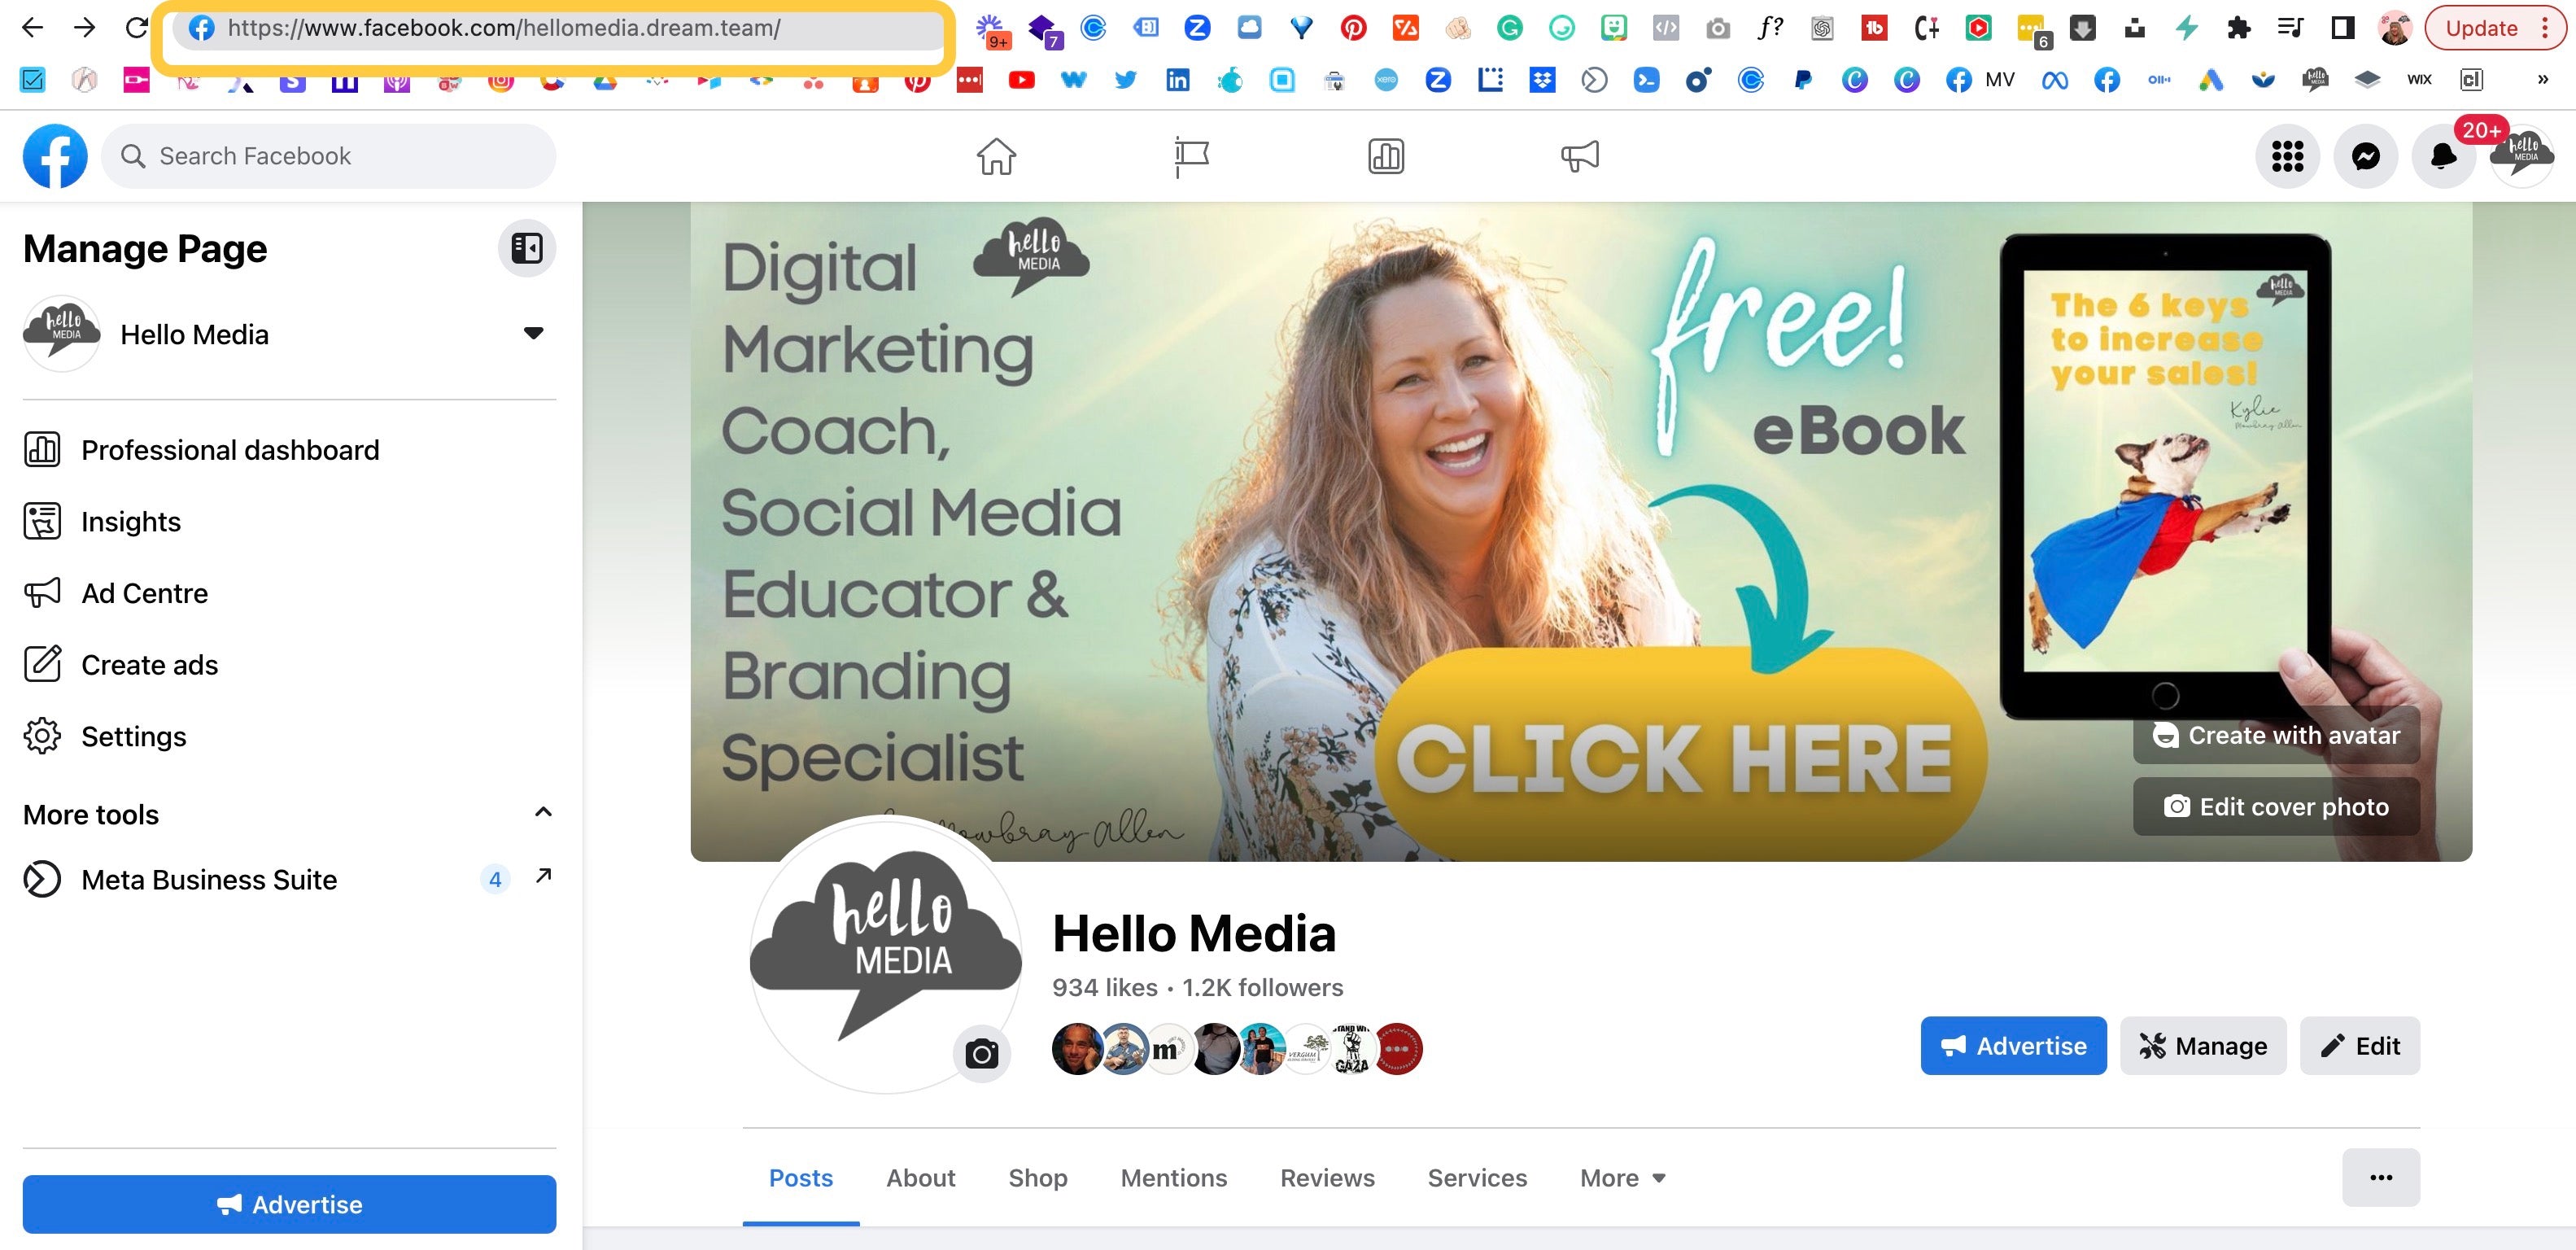 Top 7 Ways to Optimize Facebook Business Page in 2023 - LearnWoo